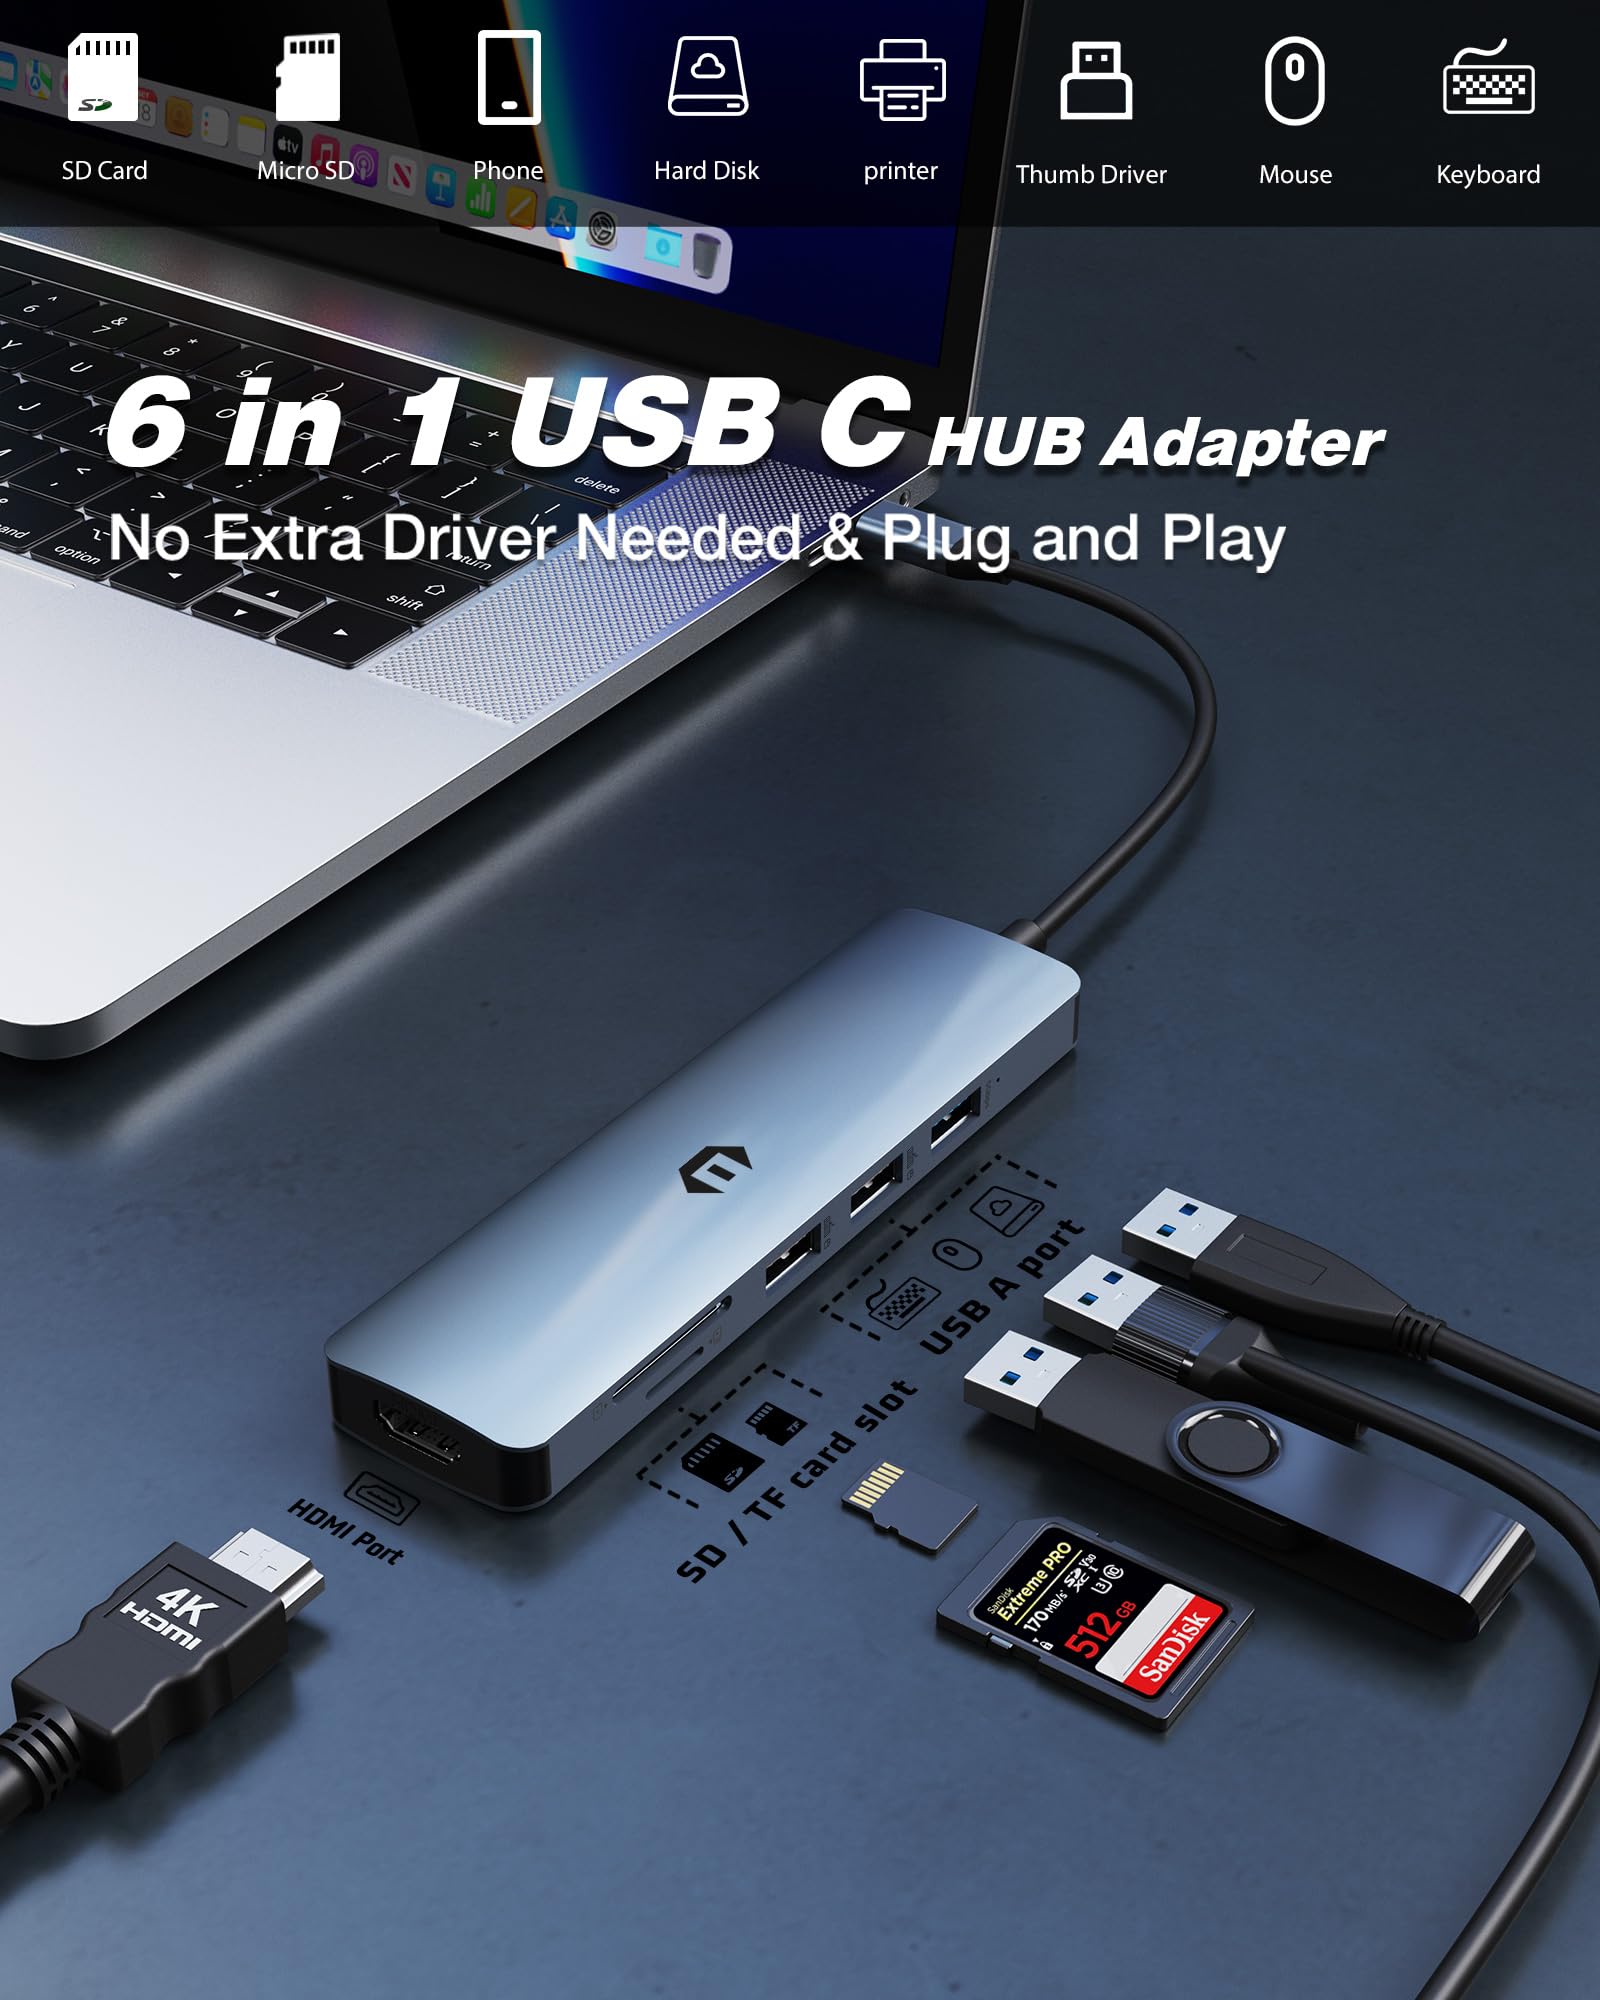 oditton 6 in 1 USB C HUB, USB C Adapter, USB 3.0, 4K HDMI, 2 x USB 2.0, SD/TF Card Reader, Docking Station for Mac Pro/Air and Type C Devices